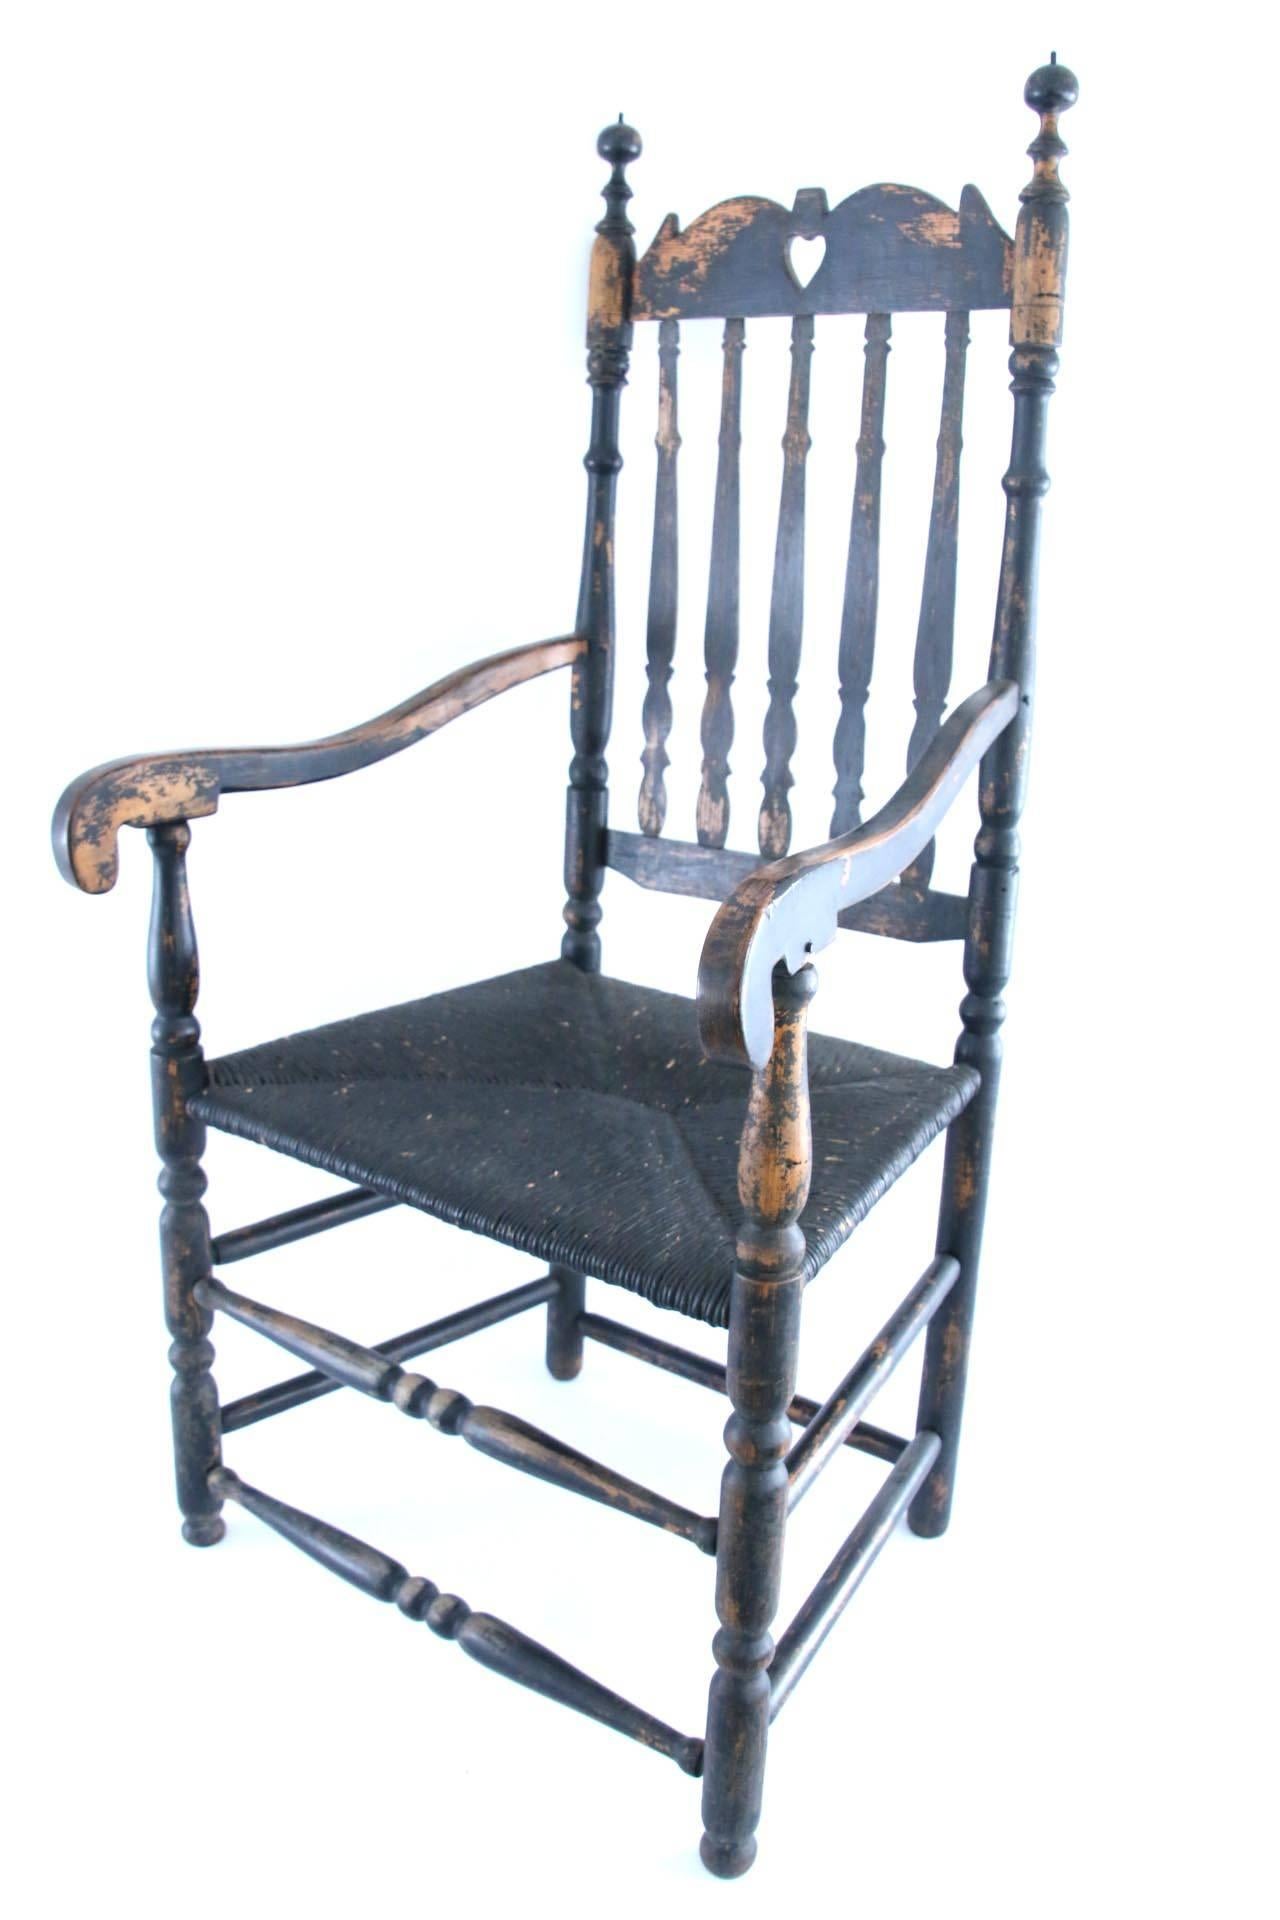 18th century black painted banister-back armchair with shaped cresting and heart cut-out along with vase-and ring-turned stiles possessing bulbous finials and scrolled handholds, all supported on vase-and ring-turned legs and joined by double